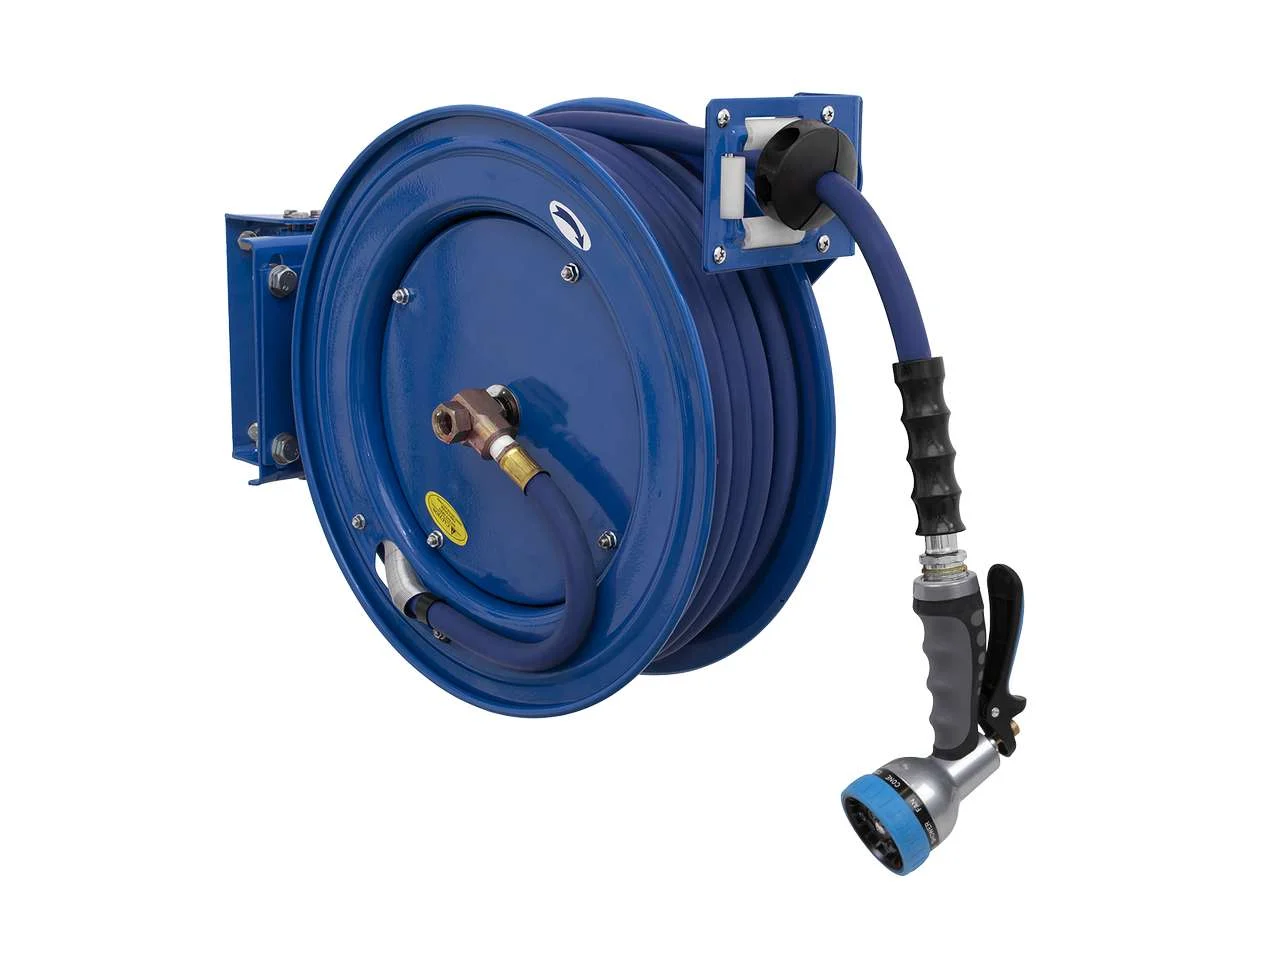 Sealey WHR1512 15m 13mm Heavy-Duty Retractable Water Hose